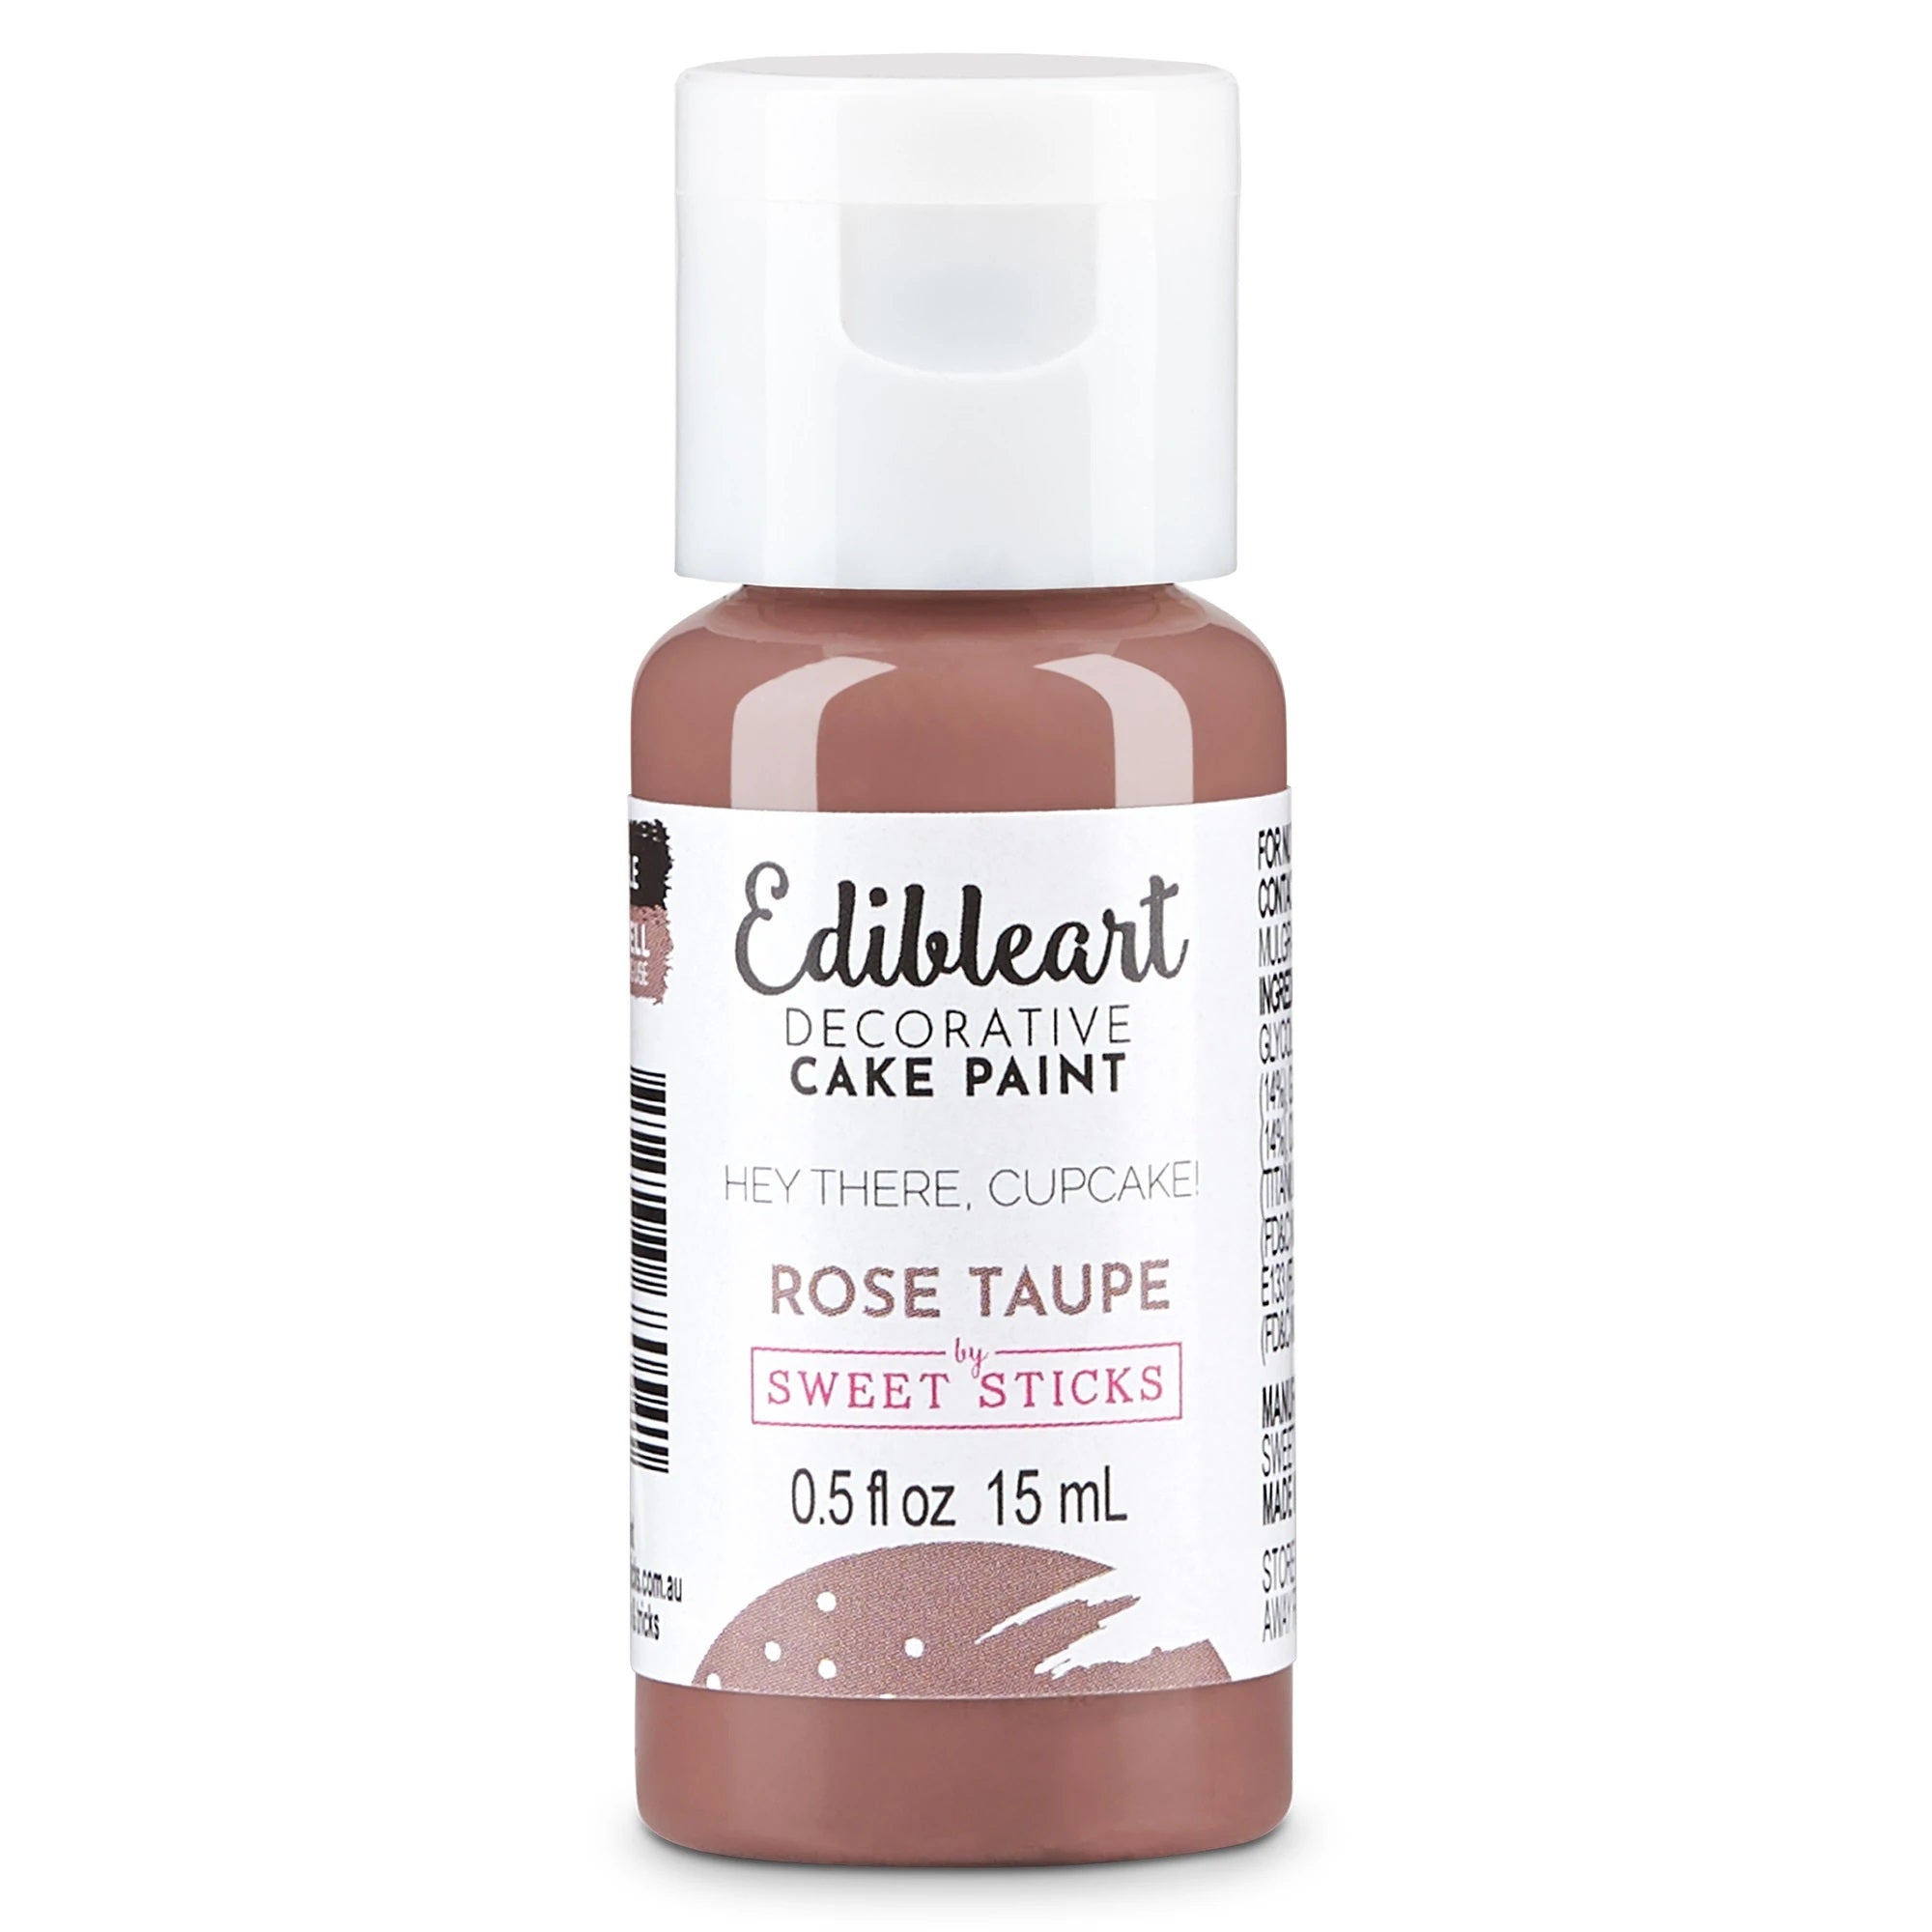 Edible Art Decorative Paint by Sweet Sticks - Rose Taupe - Kate's Cupboard